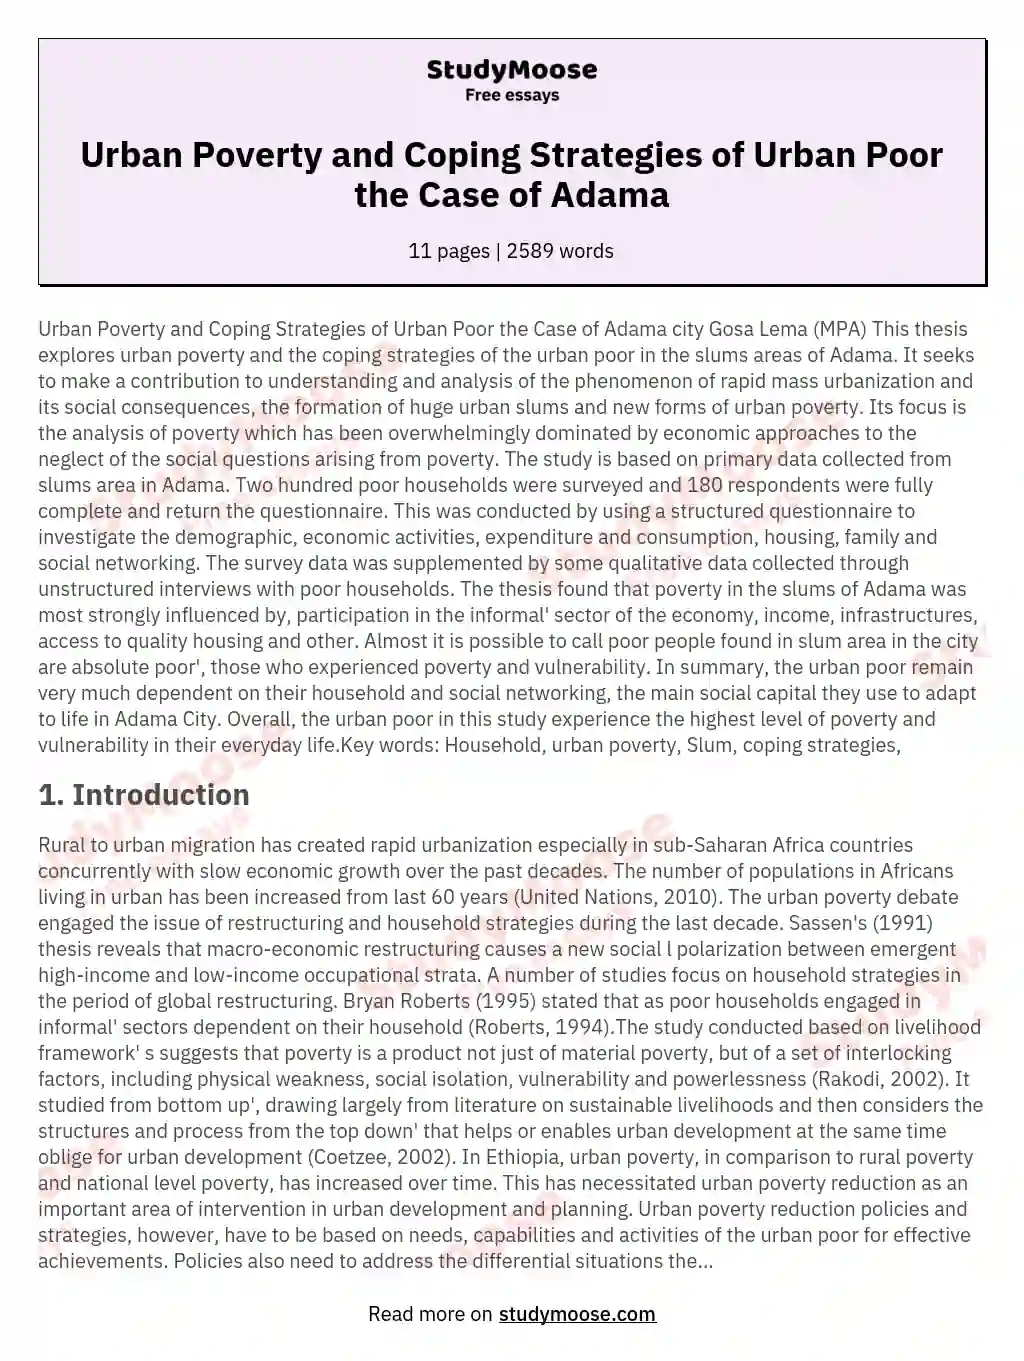 Urban Poverty and Coping Strategies of Urban Poor the Case of Adama essay